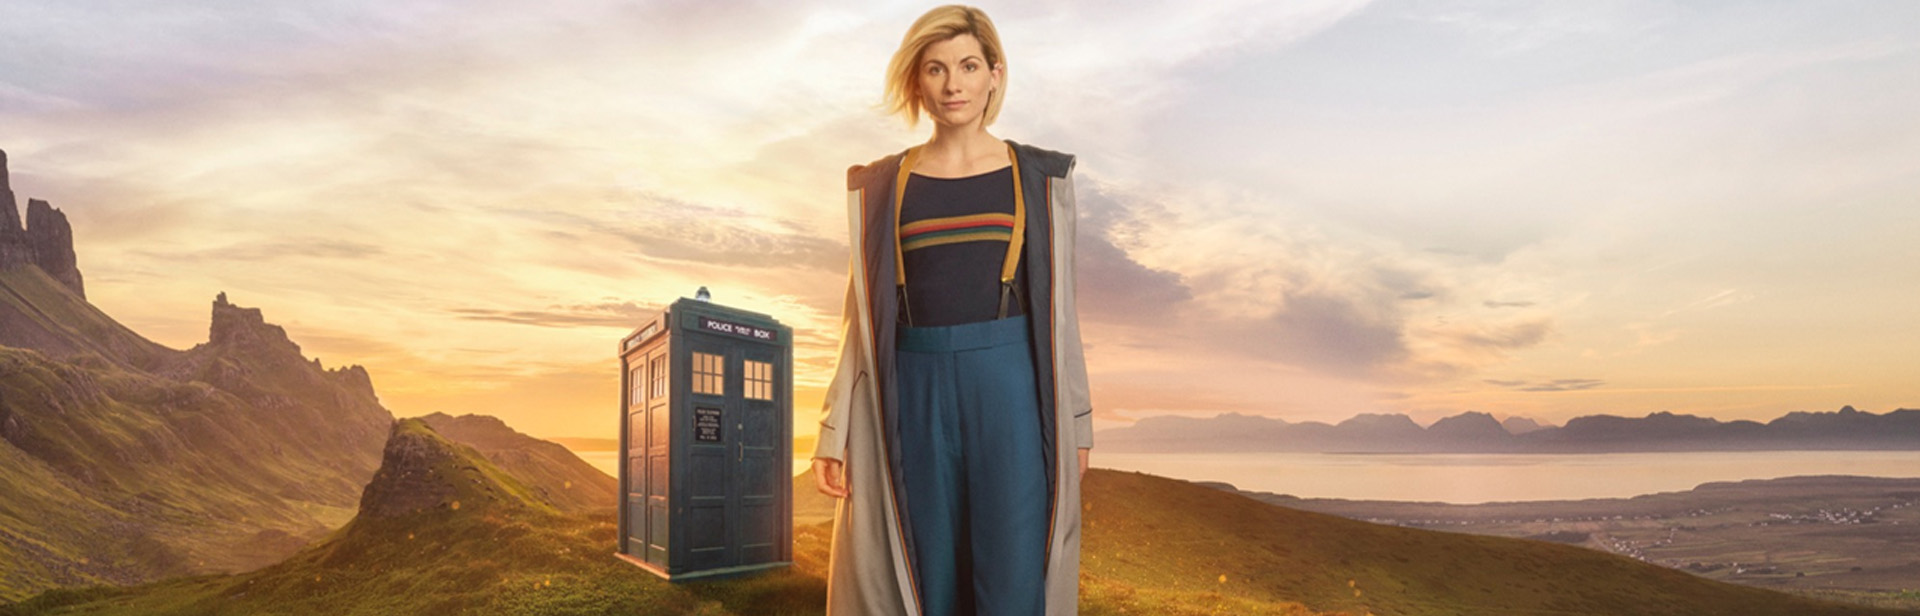 Get ready for Doctor Who series 11 on OSN 